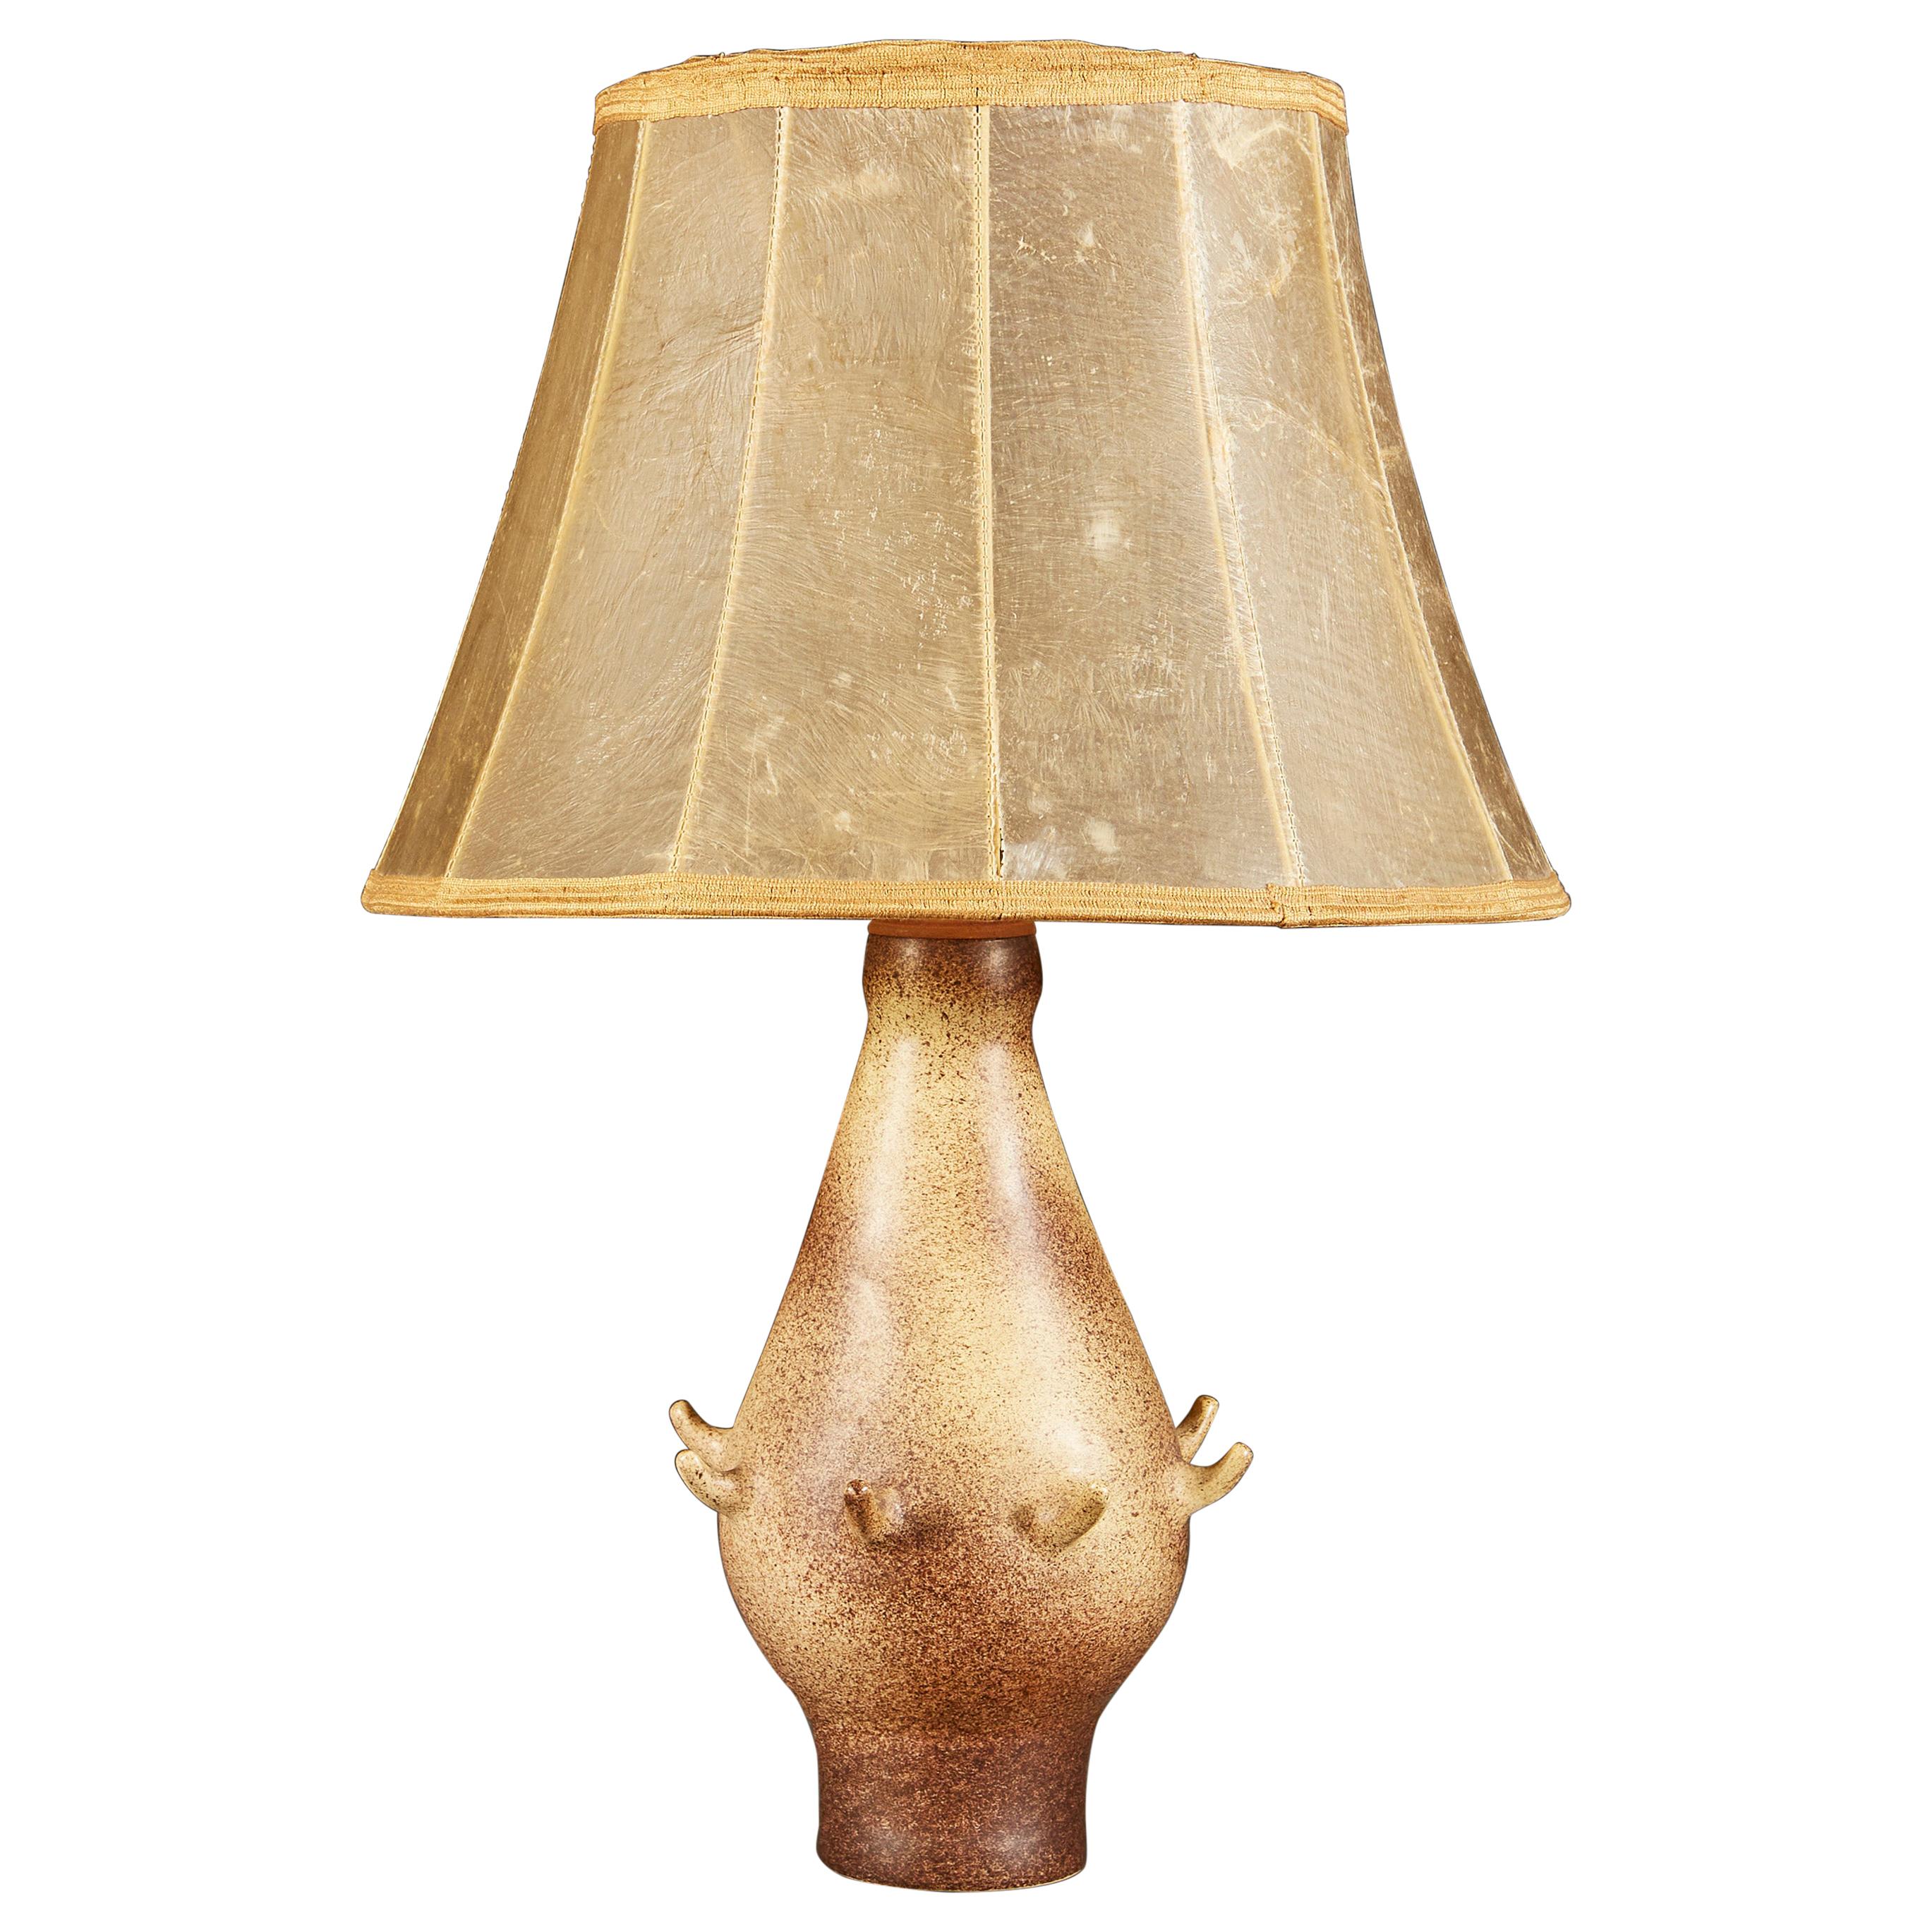 Unusual French Art Potery Table Lamp For Sale